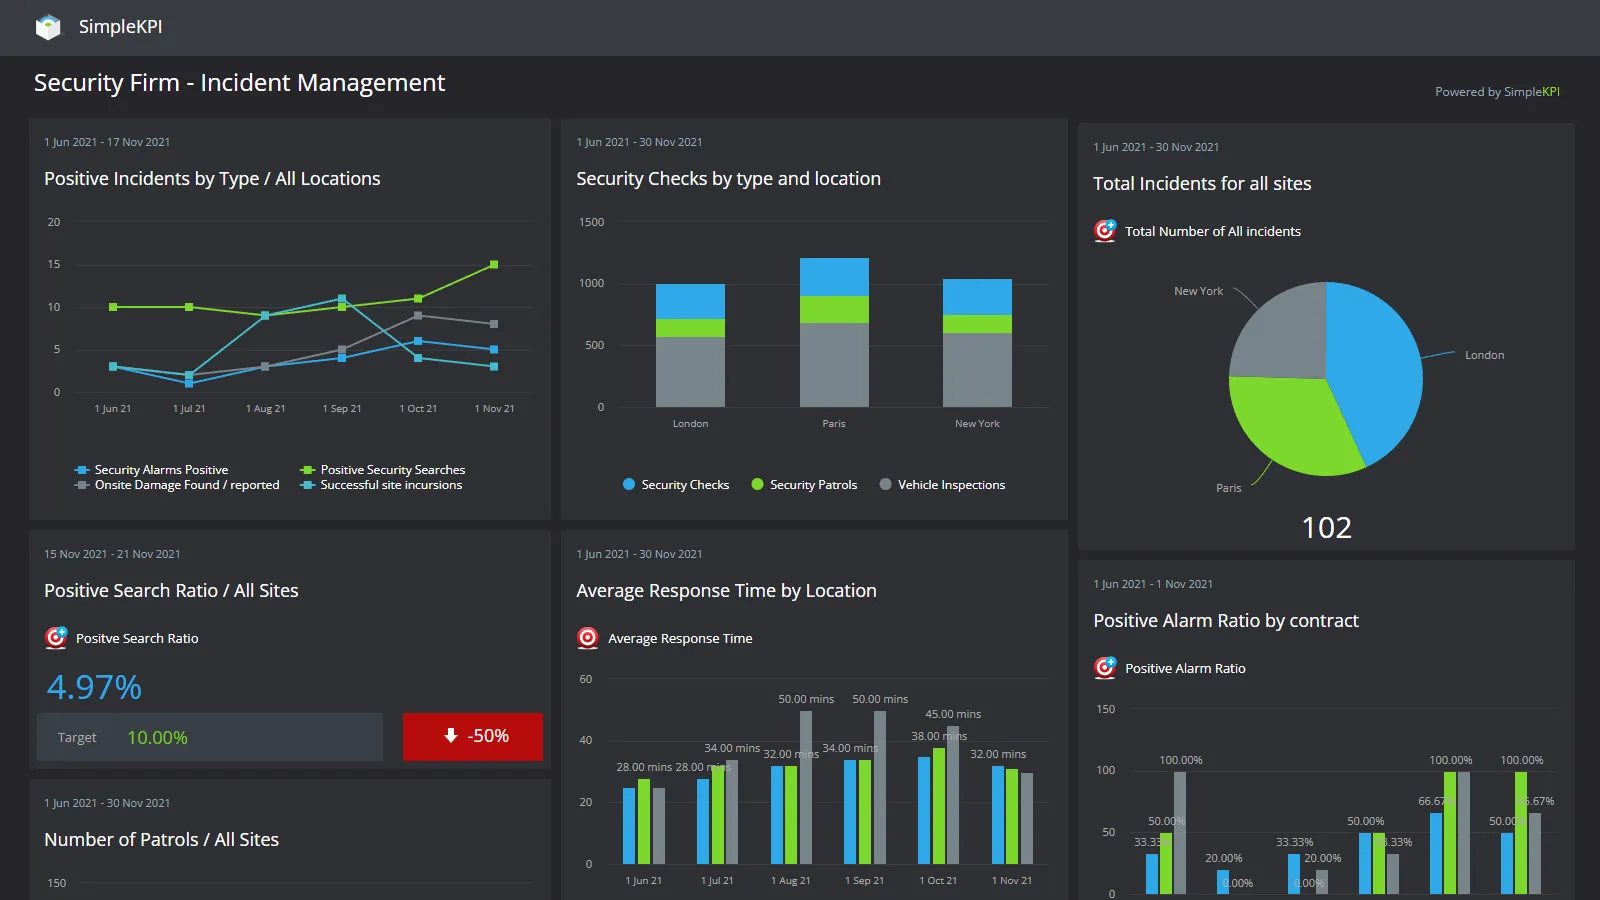 Three Security company focused digital dashboards with dark theme displaying bar charts and graphs of various Security Firm based Key Performance Indicators and Metrics.